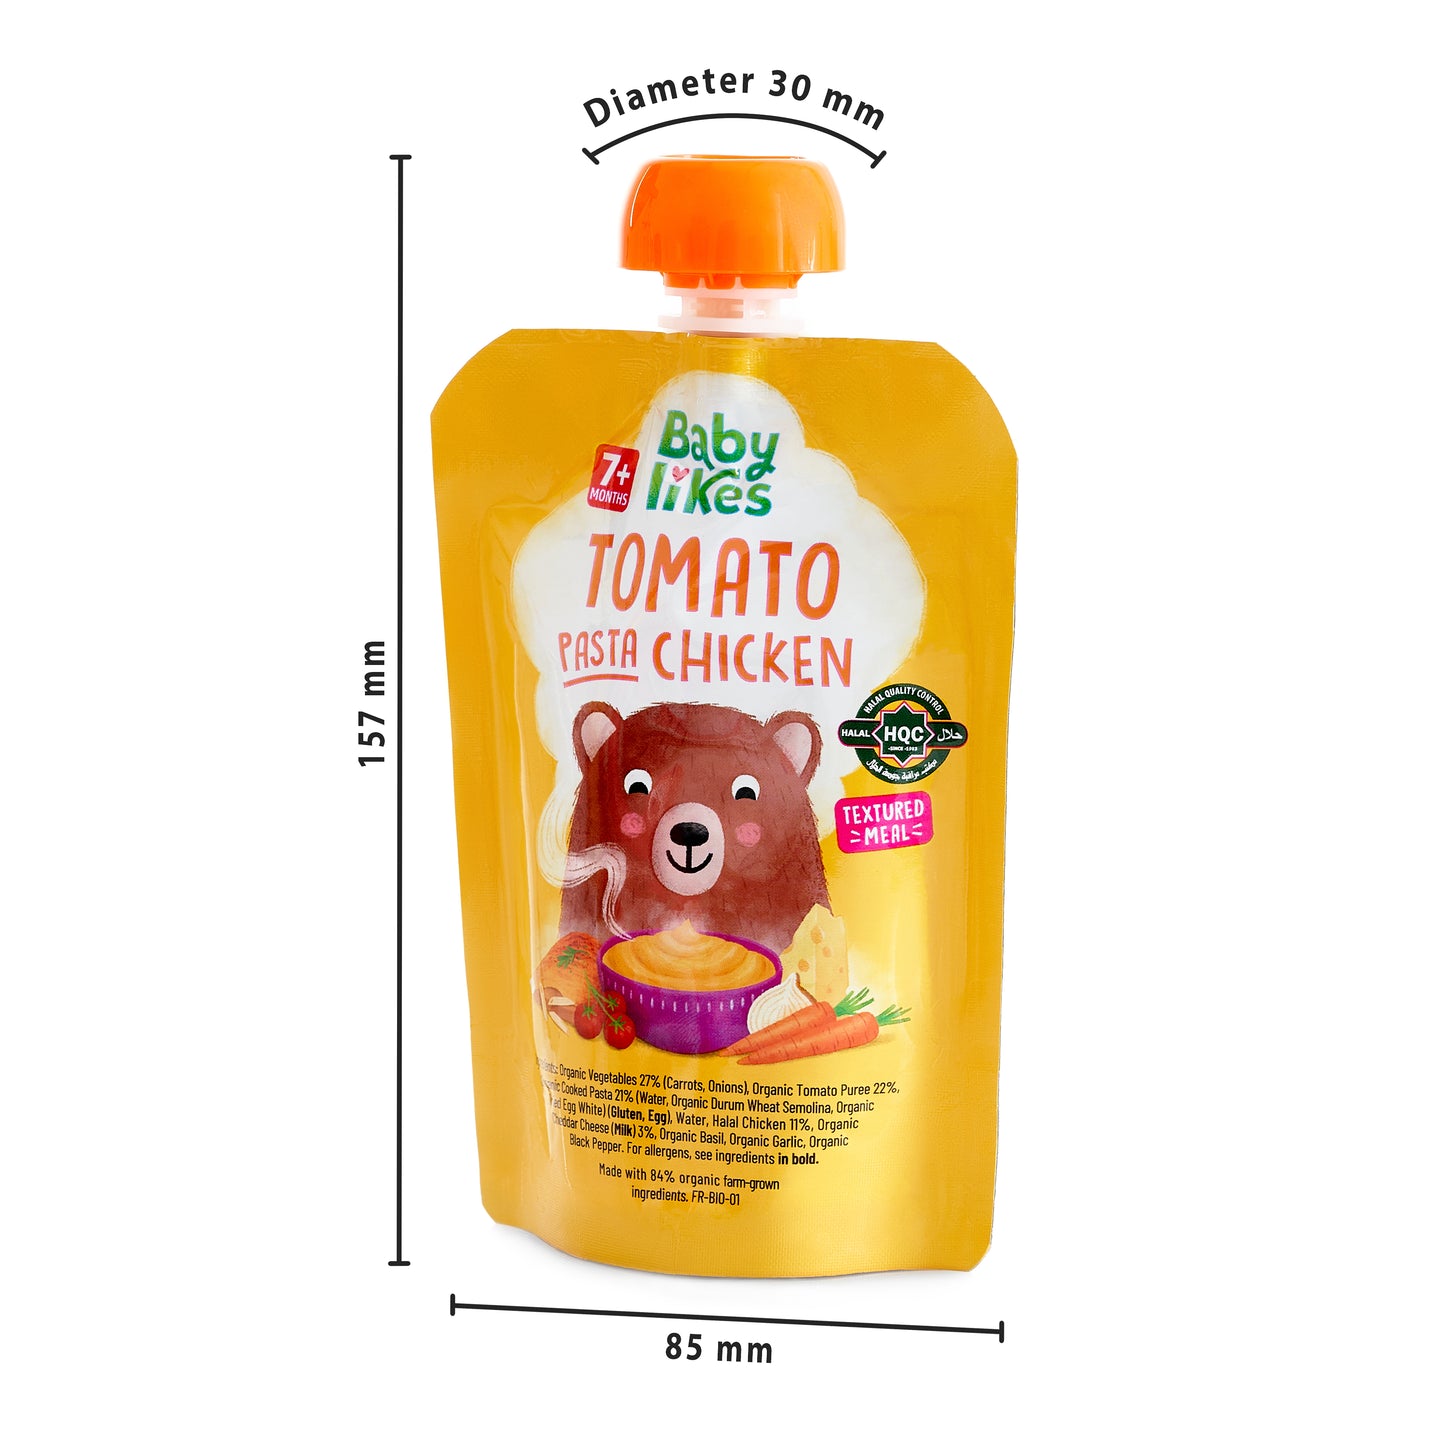 Halal Baby Food Pouches - Tomato Pasta Chicken 6 pouches, 130g, Stage 2, Organic Baby Puree for 7+ months